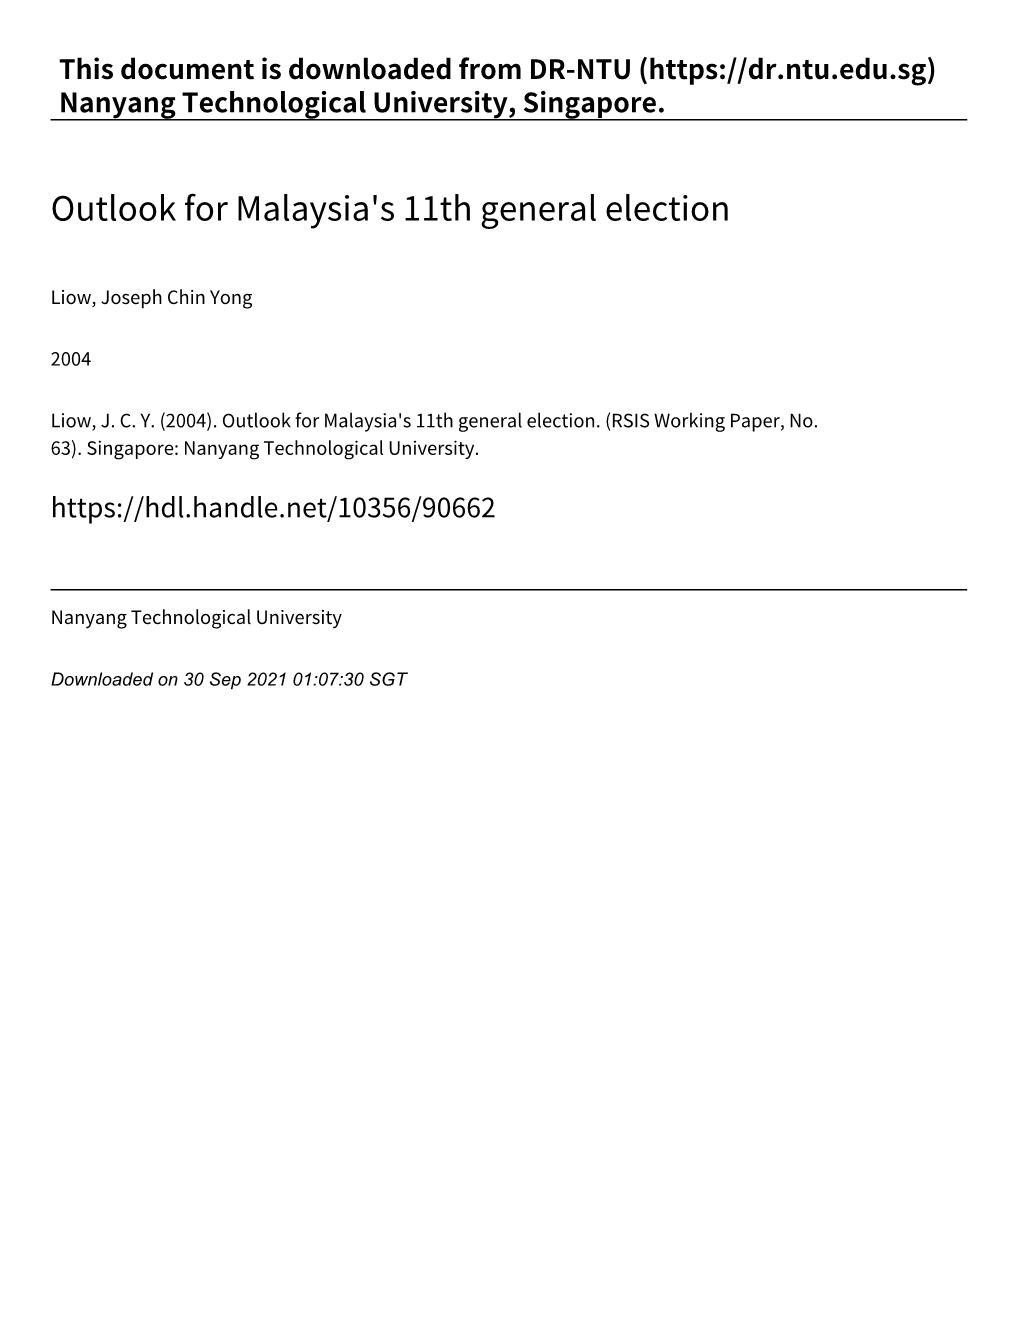 Outlook for Malaysia's 11Th General Election